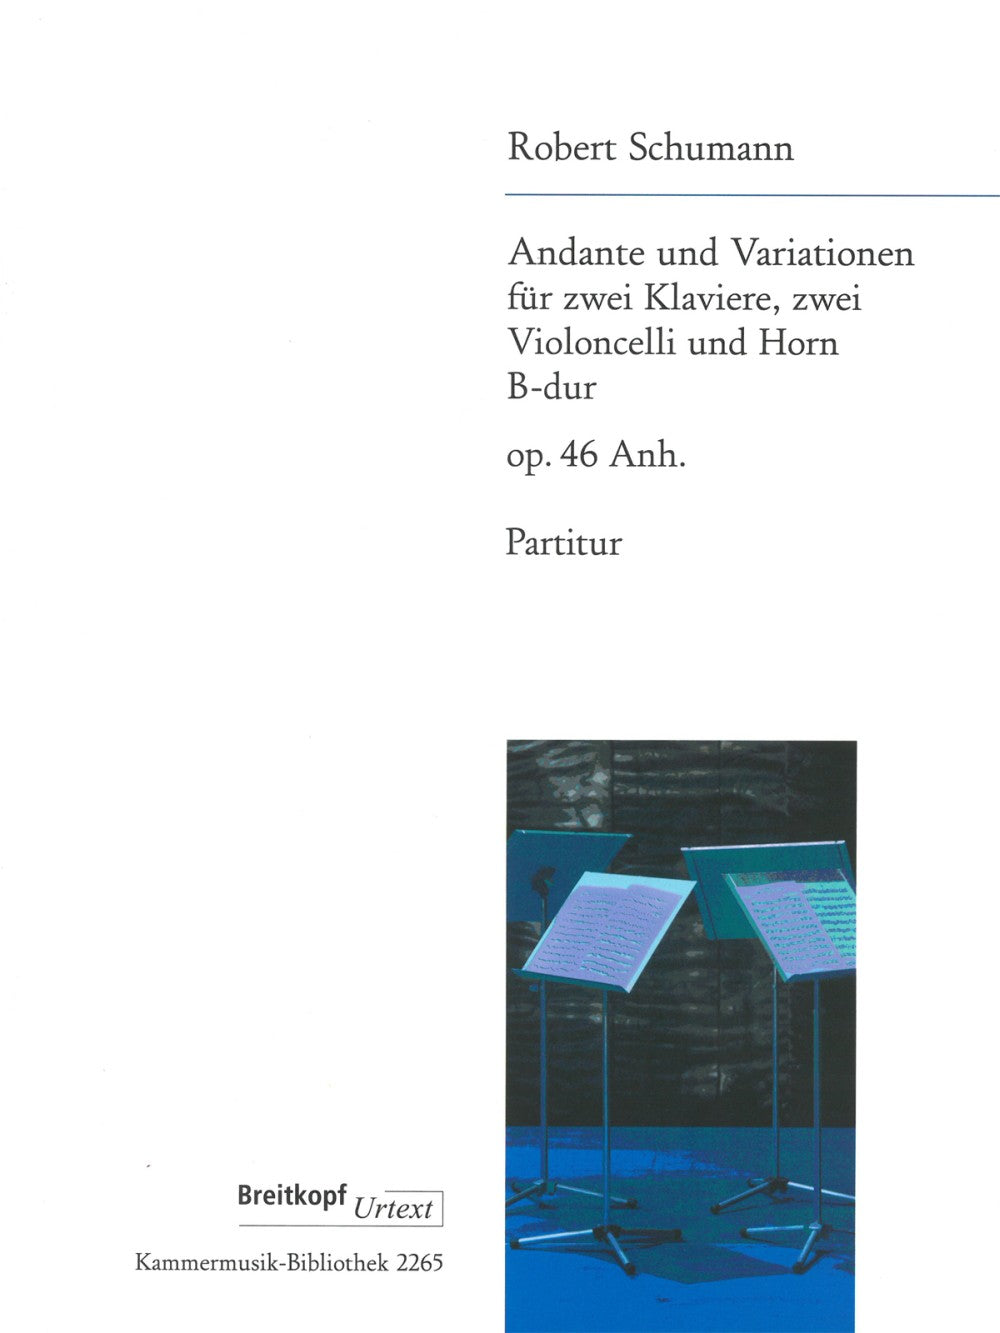 Schumann Andante and Variation op 46 Anh for 2 Pianos, 2 Cellos & Horn Full Score